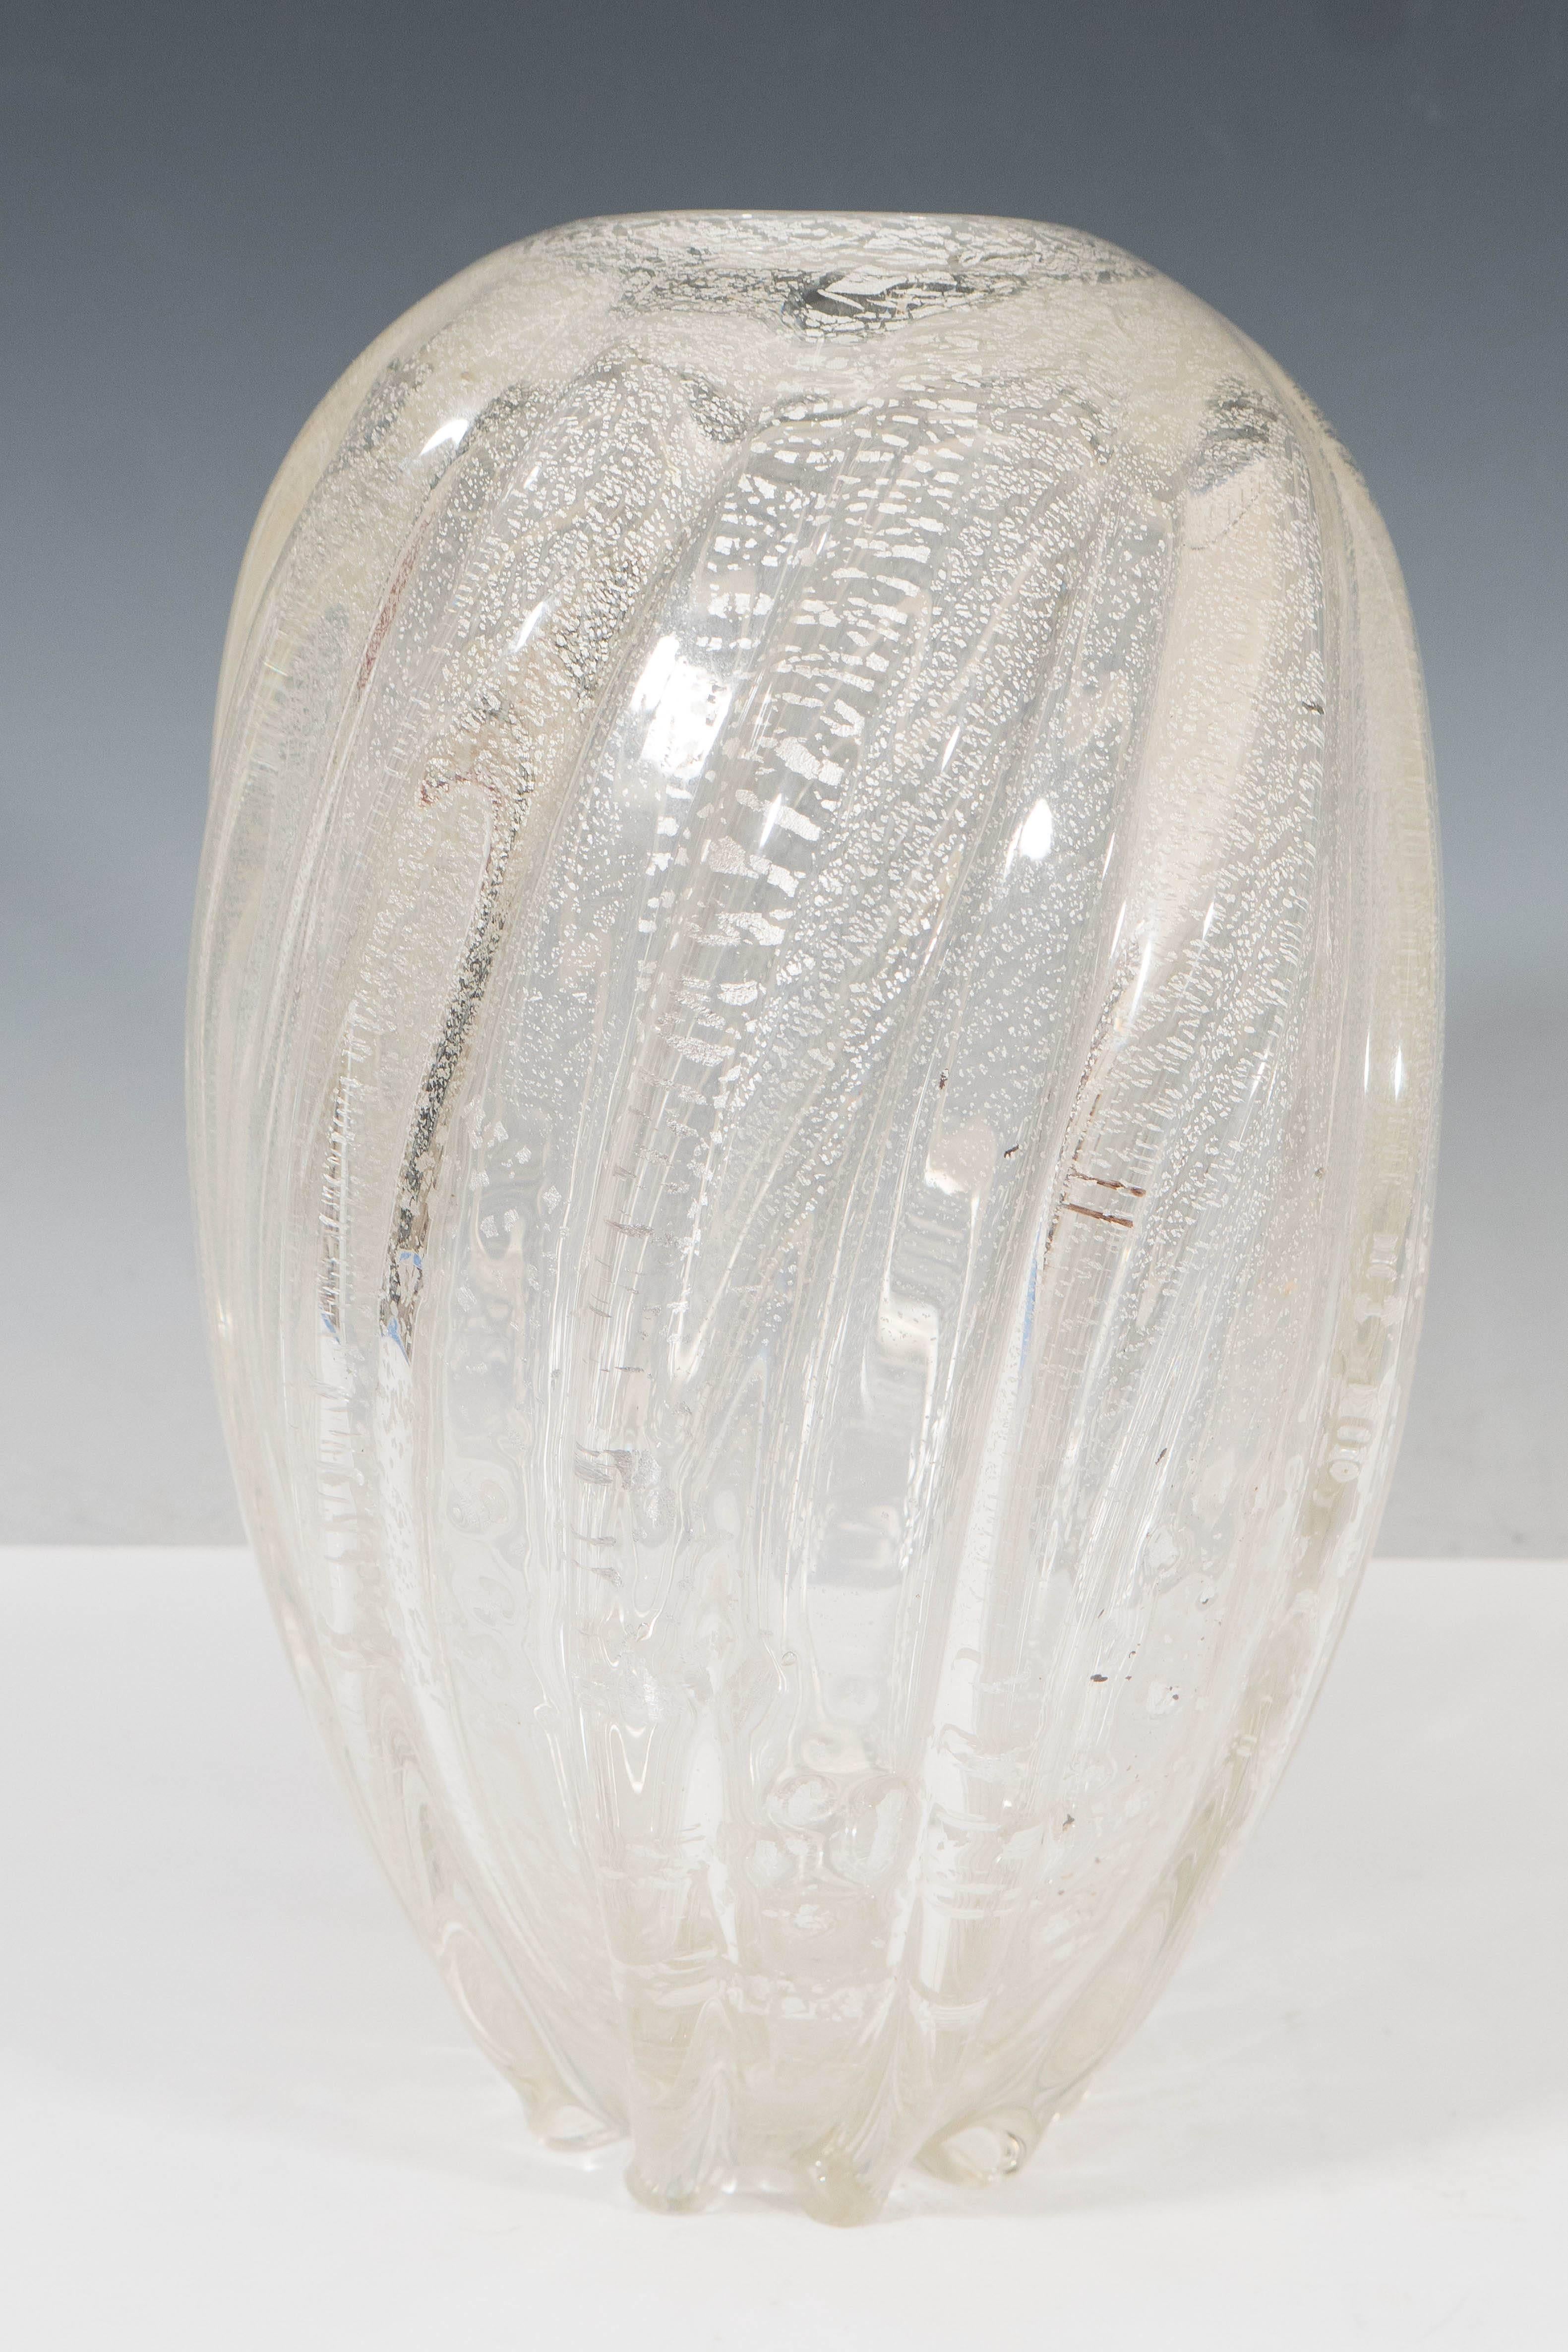 Mid-20th Century Midcentury Murano Glass Pillow Vase with 14k White Gold by Archimede Seguso